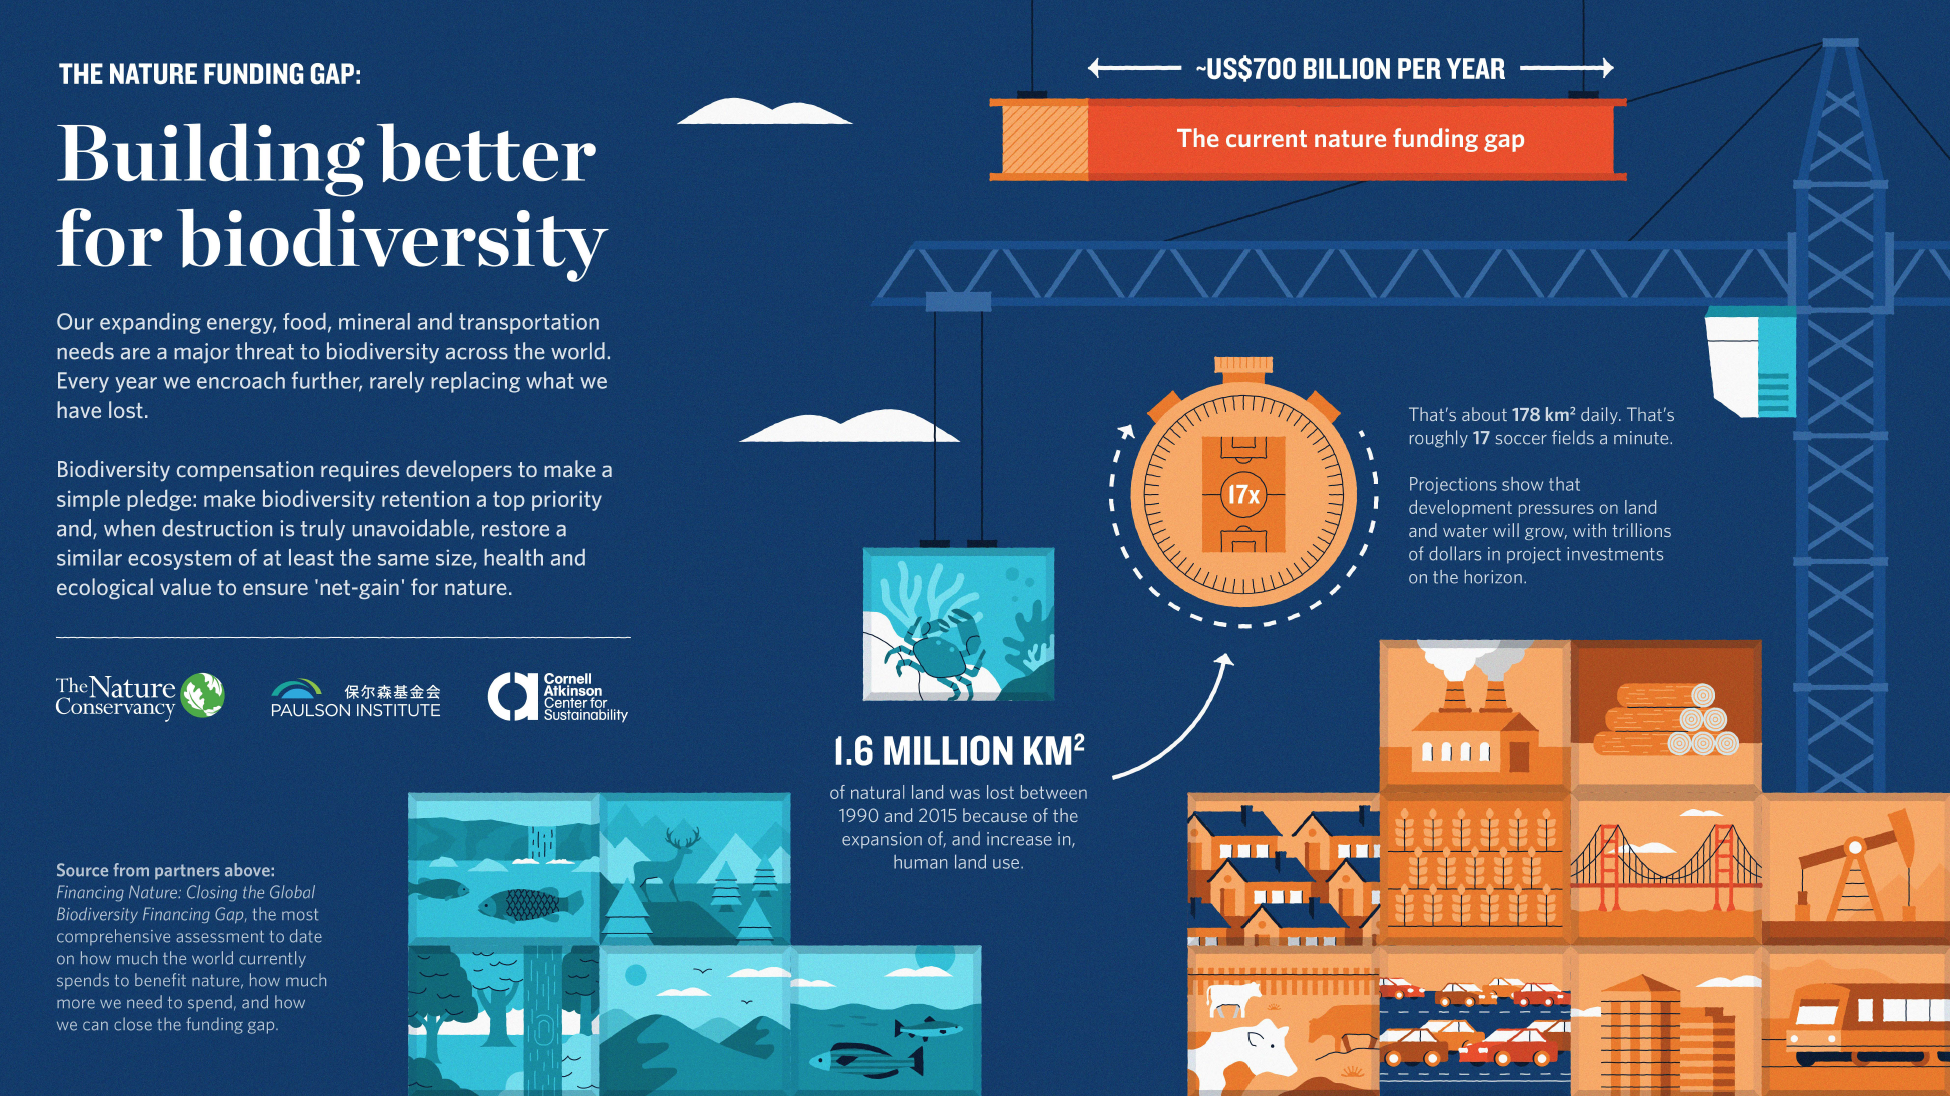 Thumbnail of a blue and orange infographic with lots of illustrations and text.